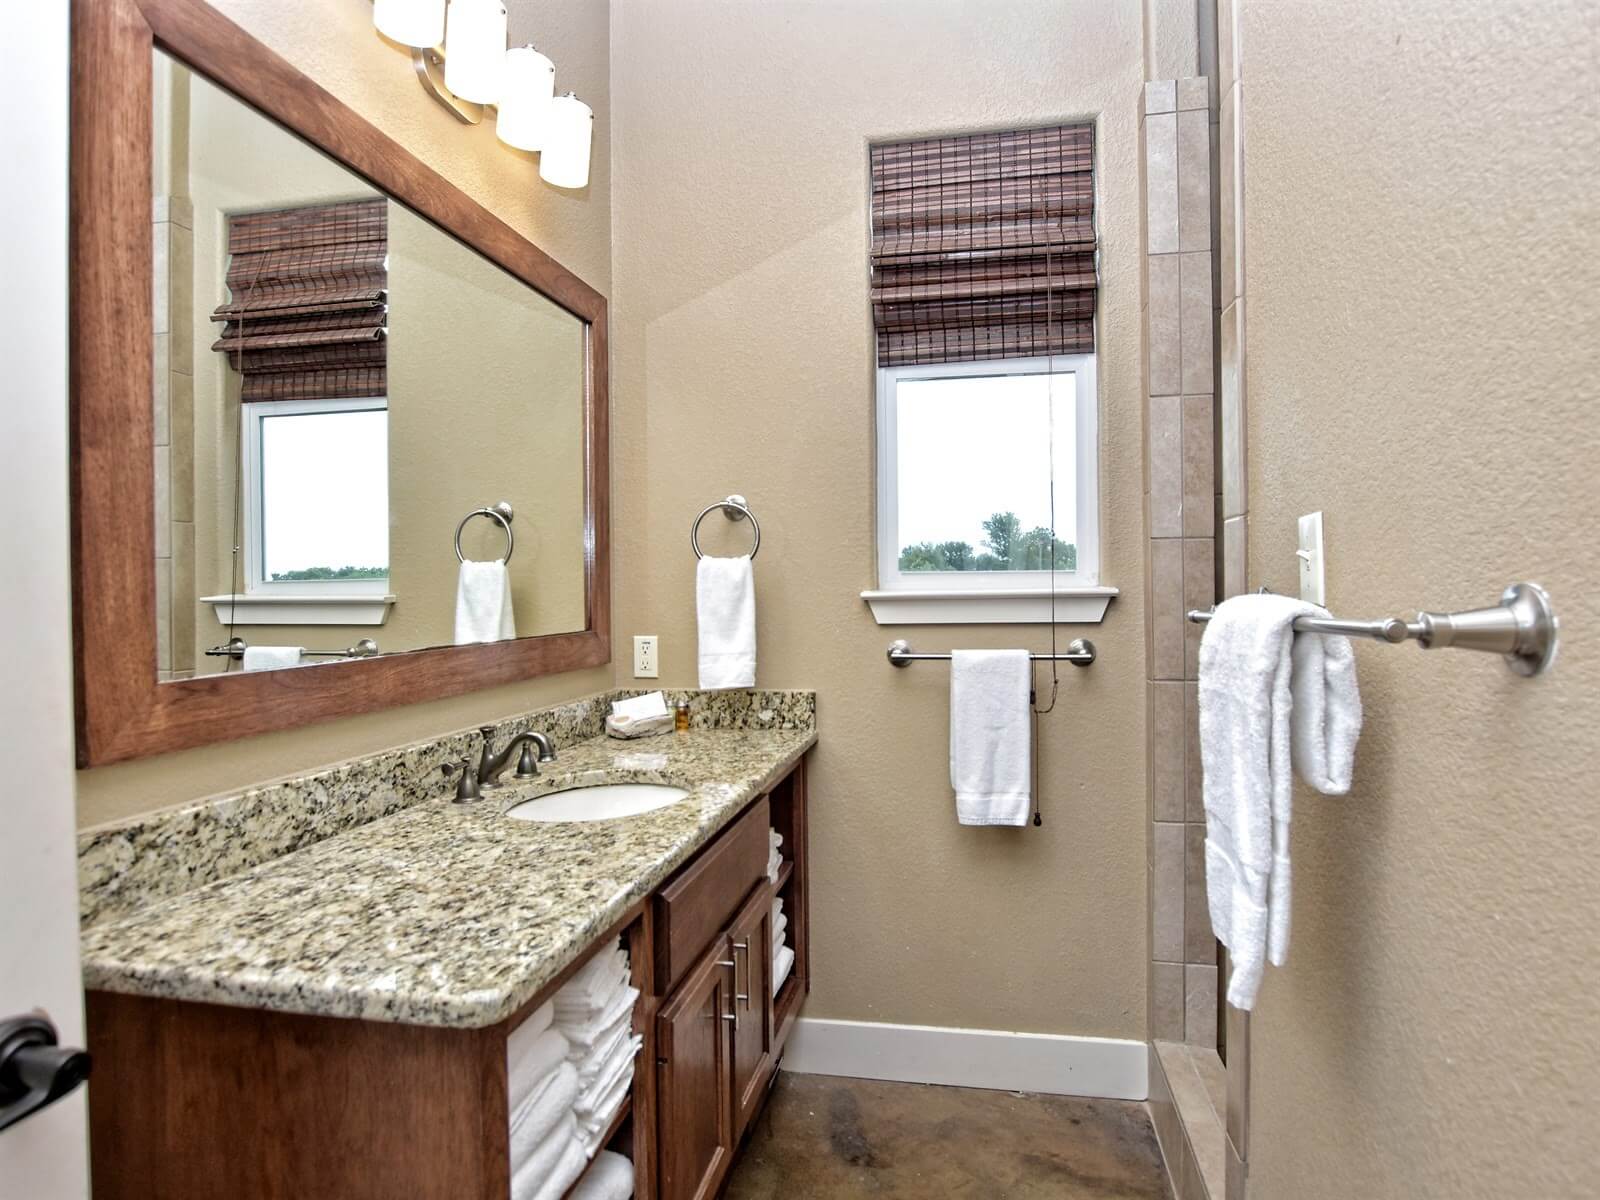 Pecan River Ranch Accommodations - Guest House Bathroom